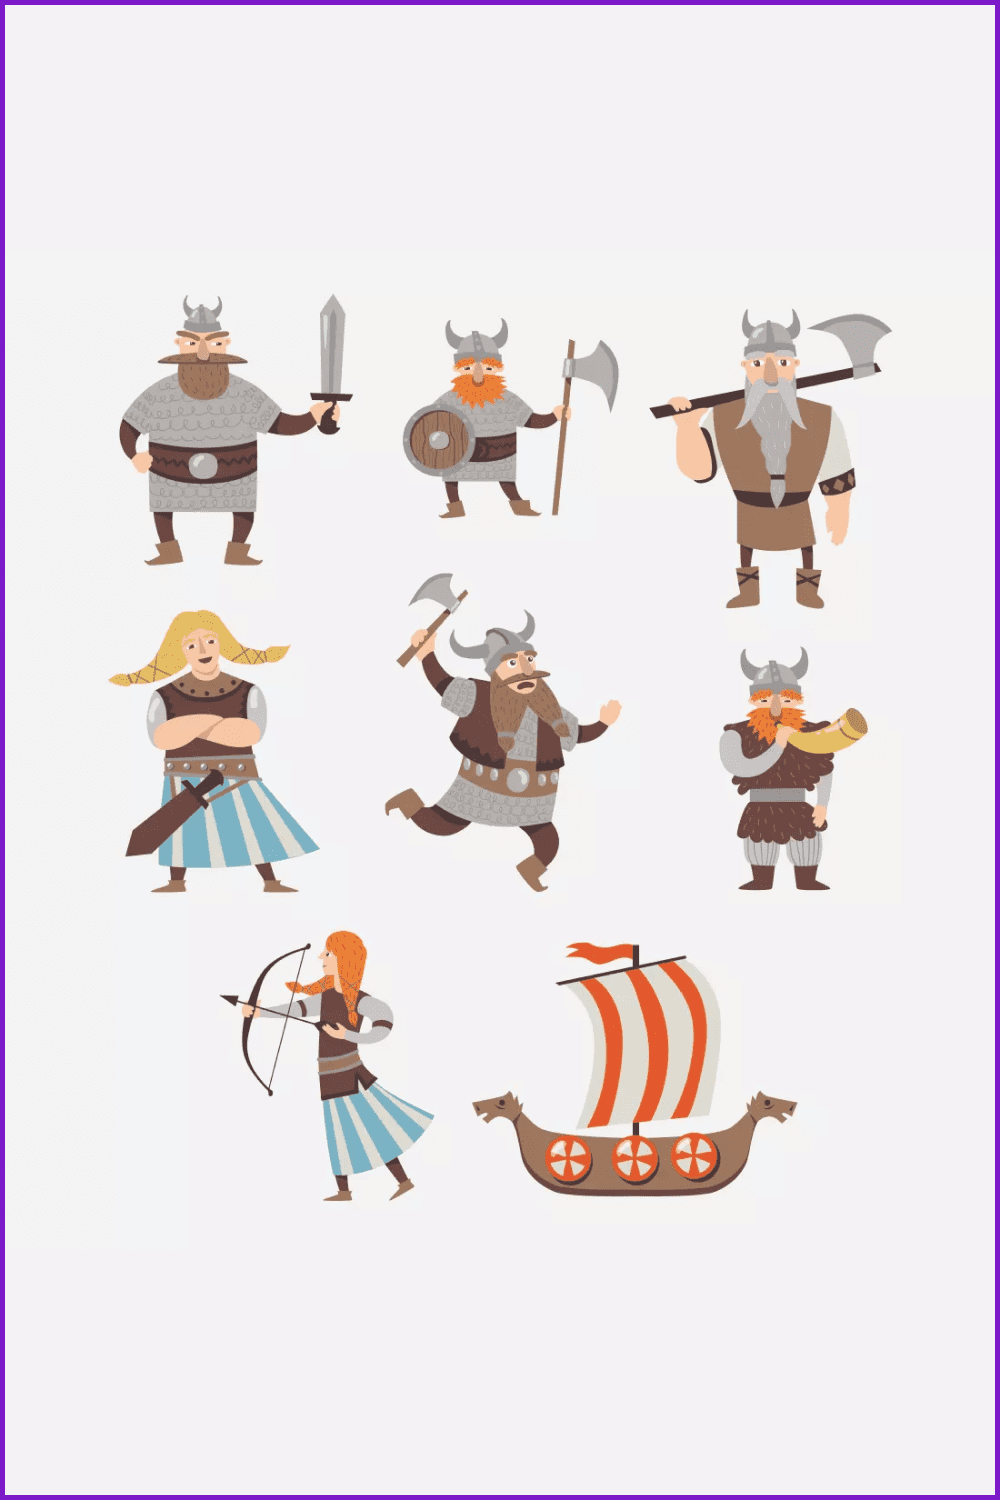 Funny different Vikings characters with a ship.